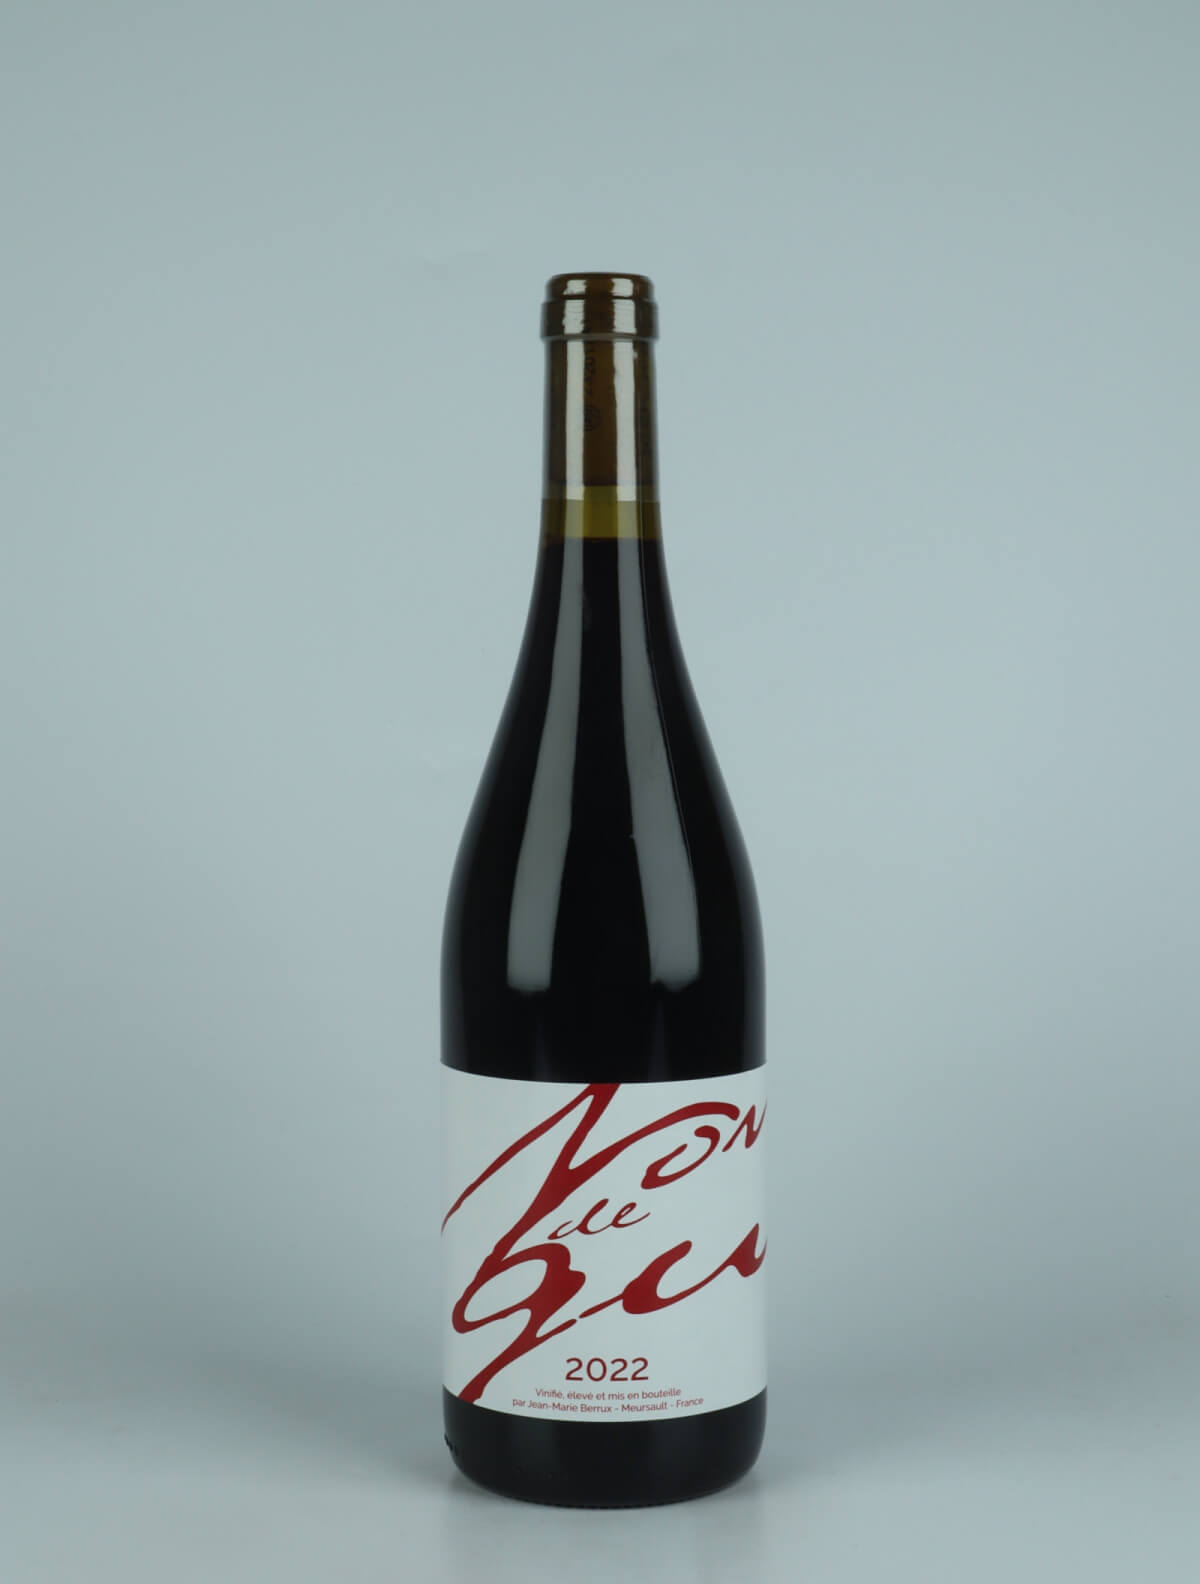 A bottle 2022 Nondegu Red wine from Jean-Marie Berrux, Burgundy in France